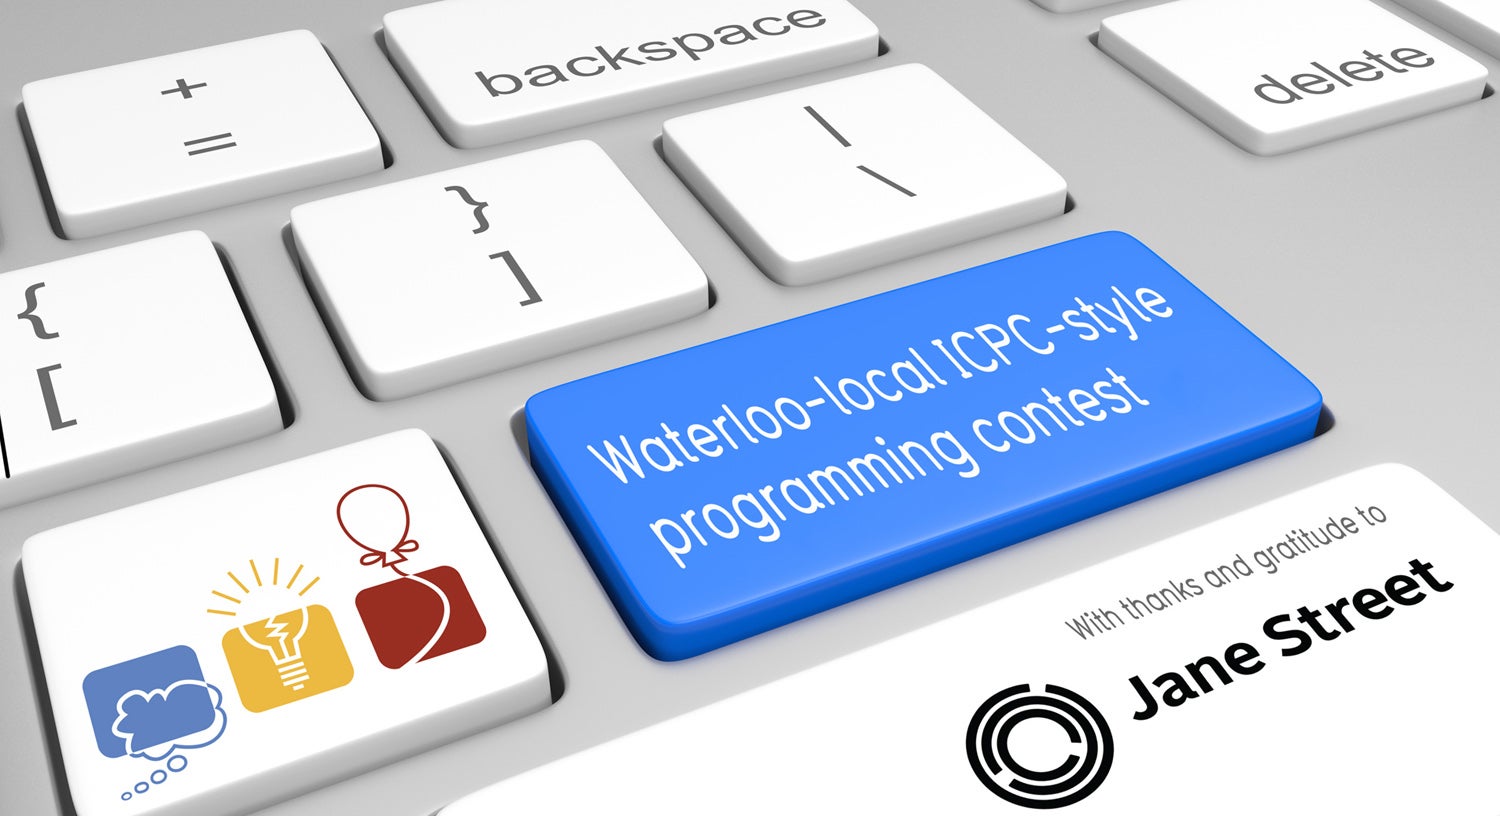 image depicting Waterloo-local ICPC-style programming contest